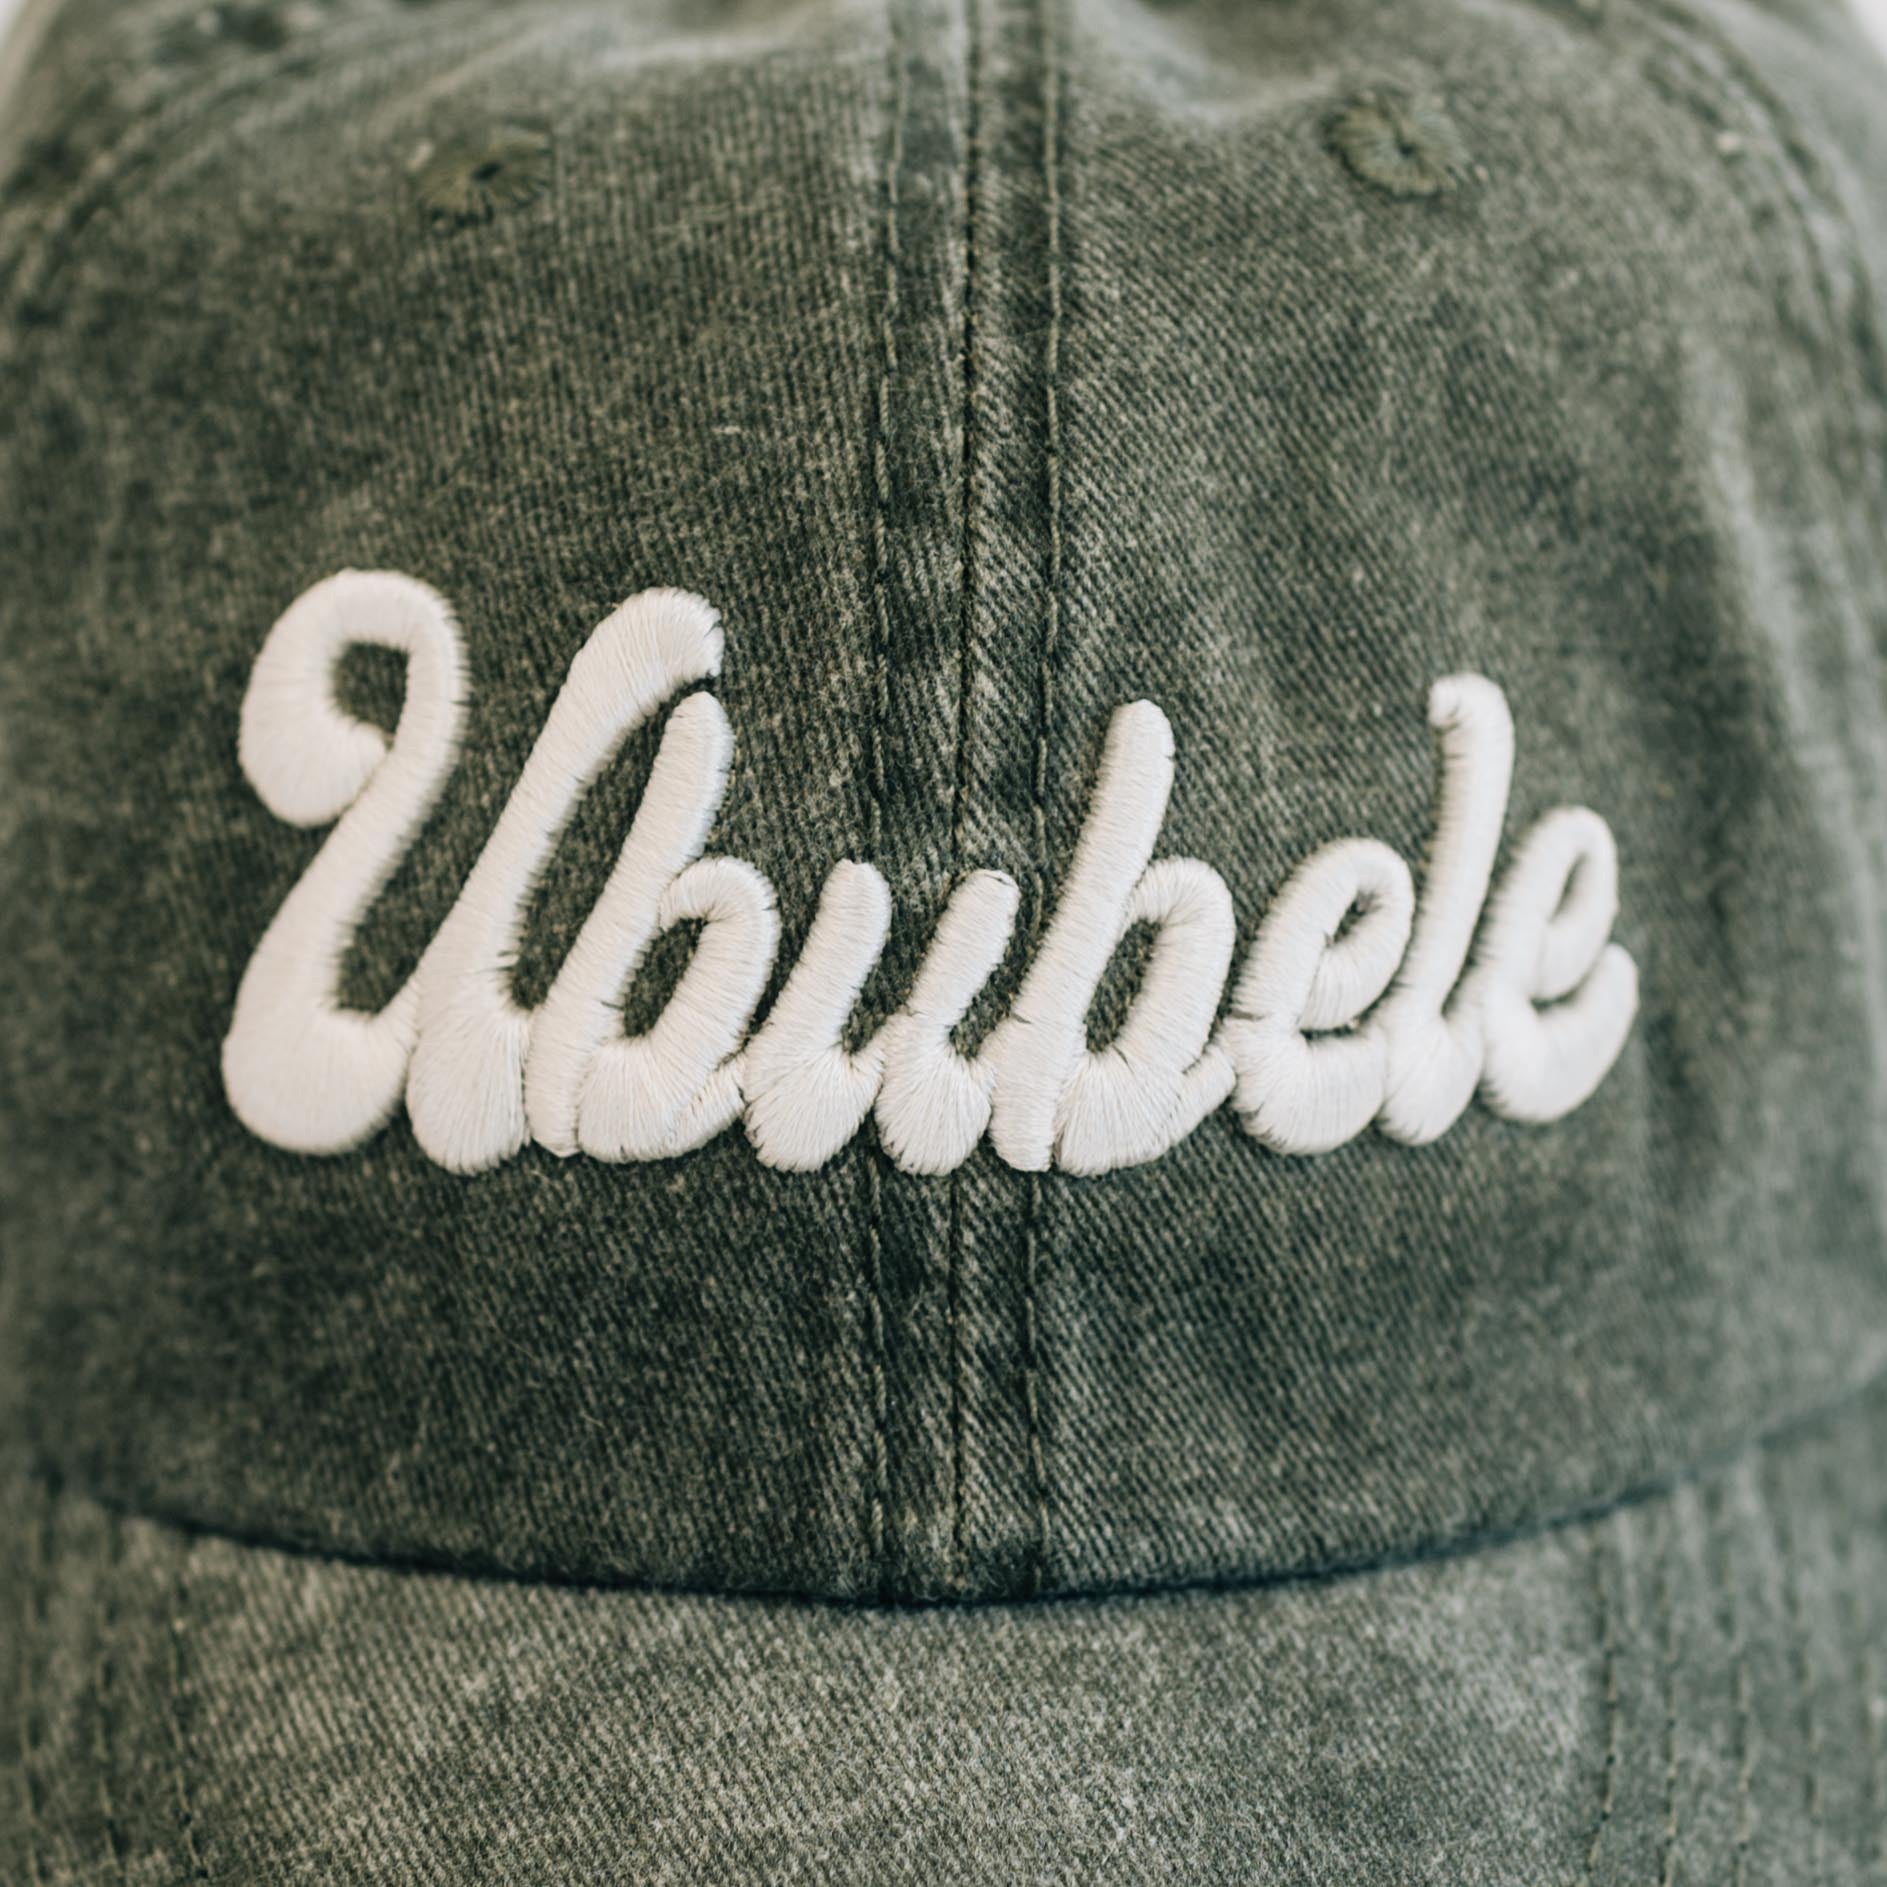 INANI • Ububele Olive Cap - Stokedthebrand. Lifestyle products for outdoor adventures. Made in South Africa